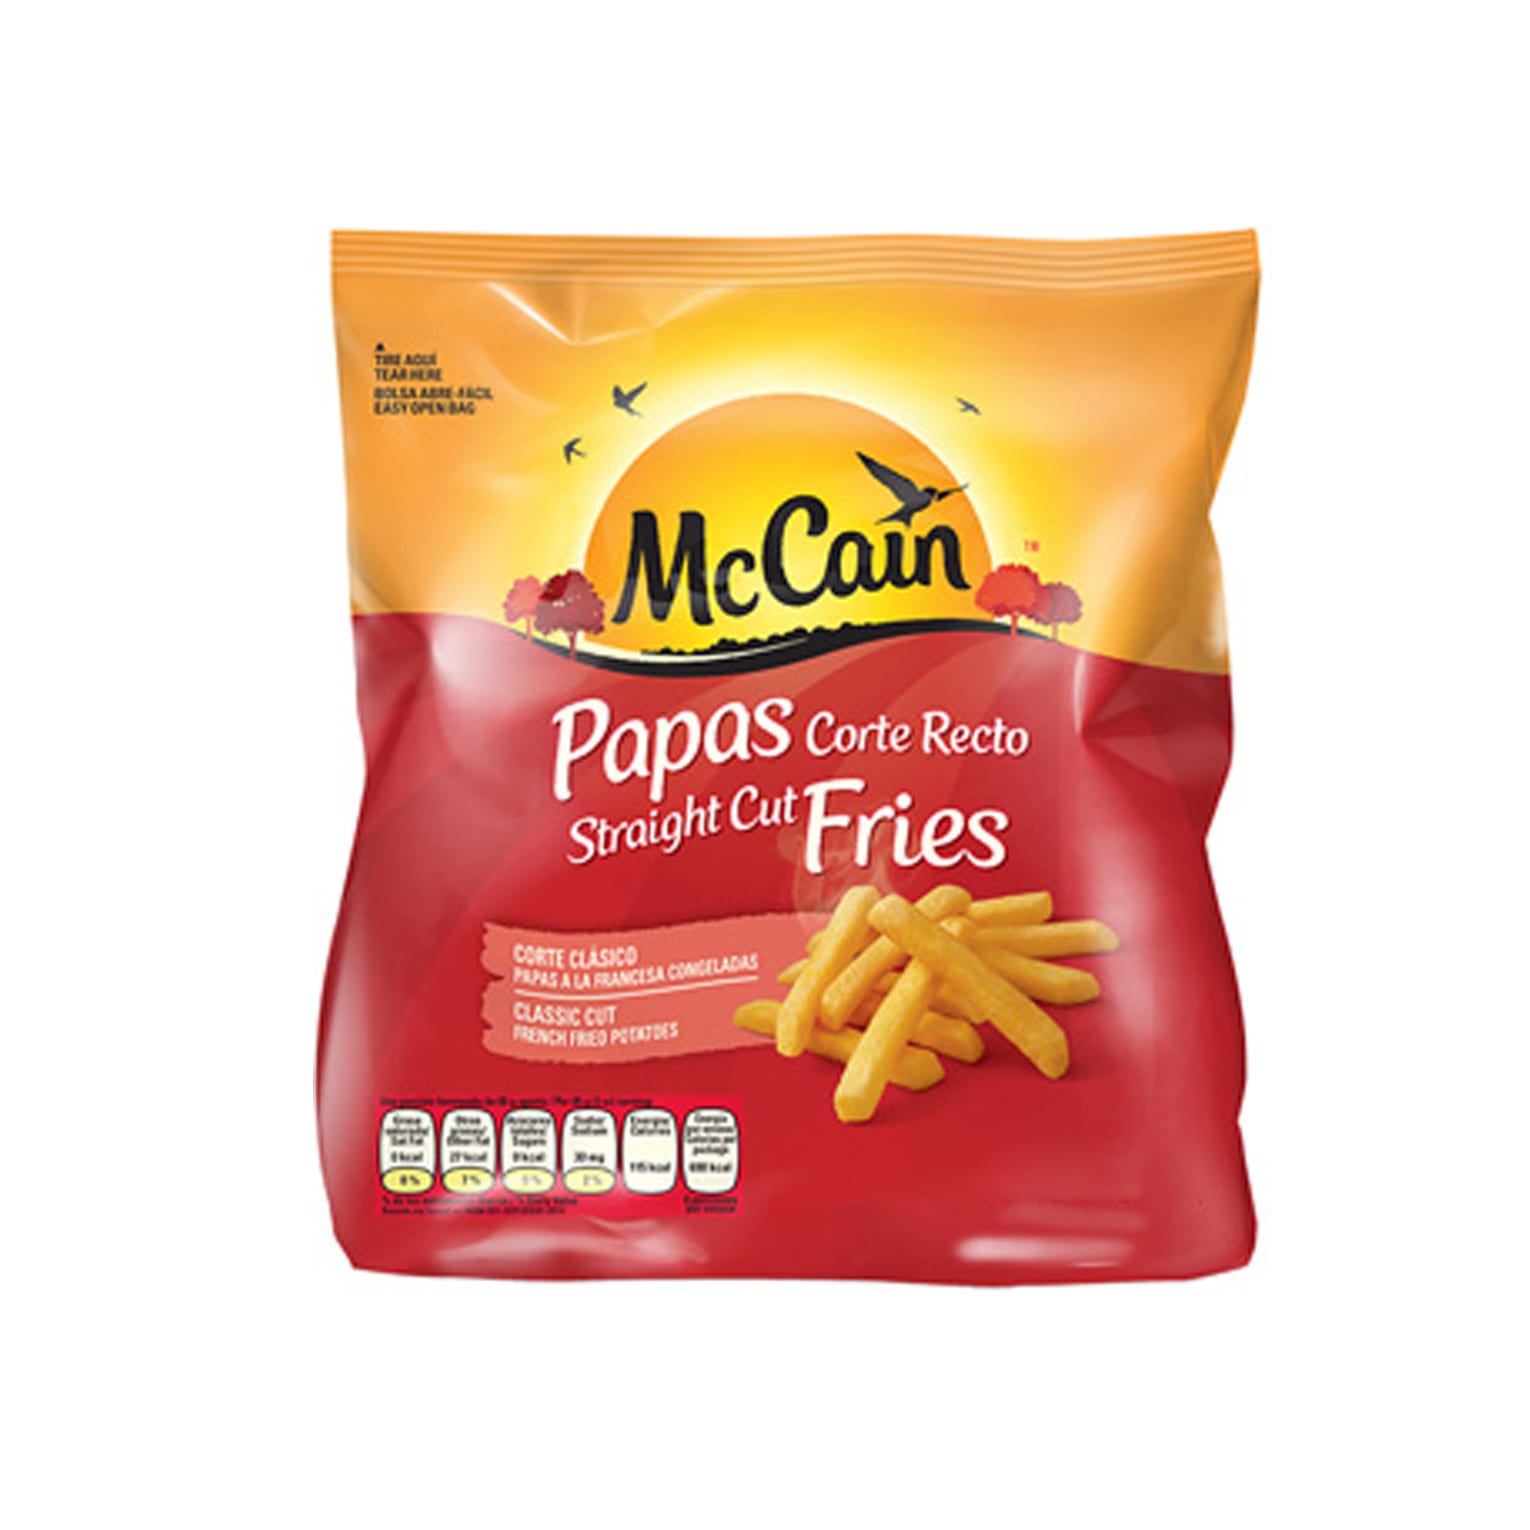 French Fries 1Kg Bag